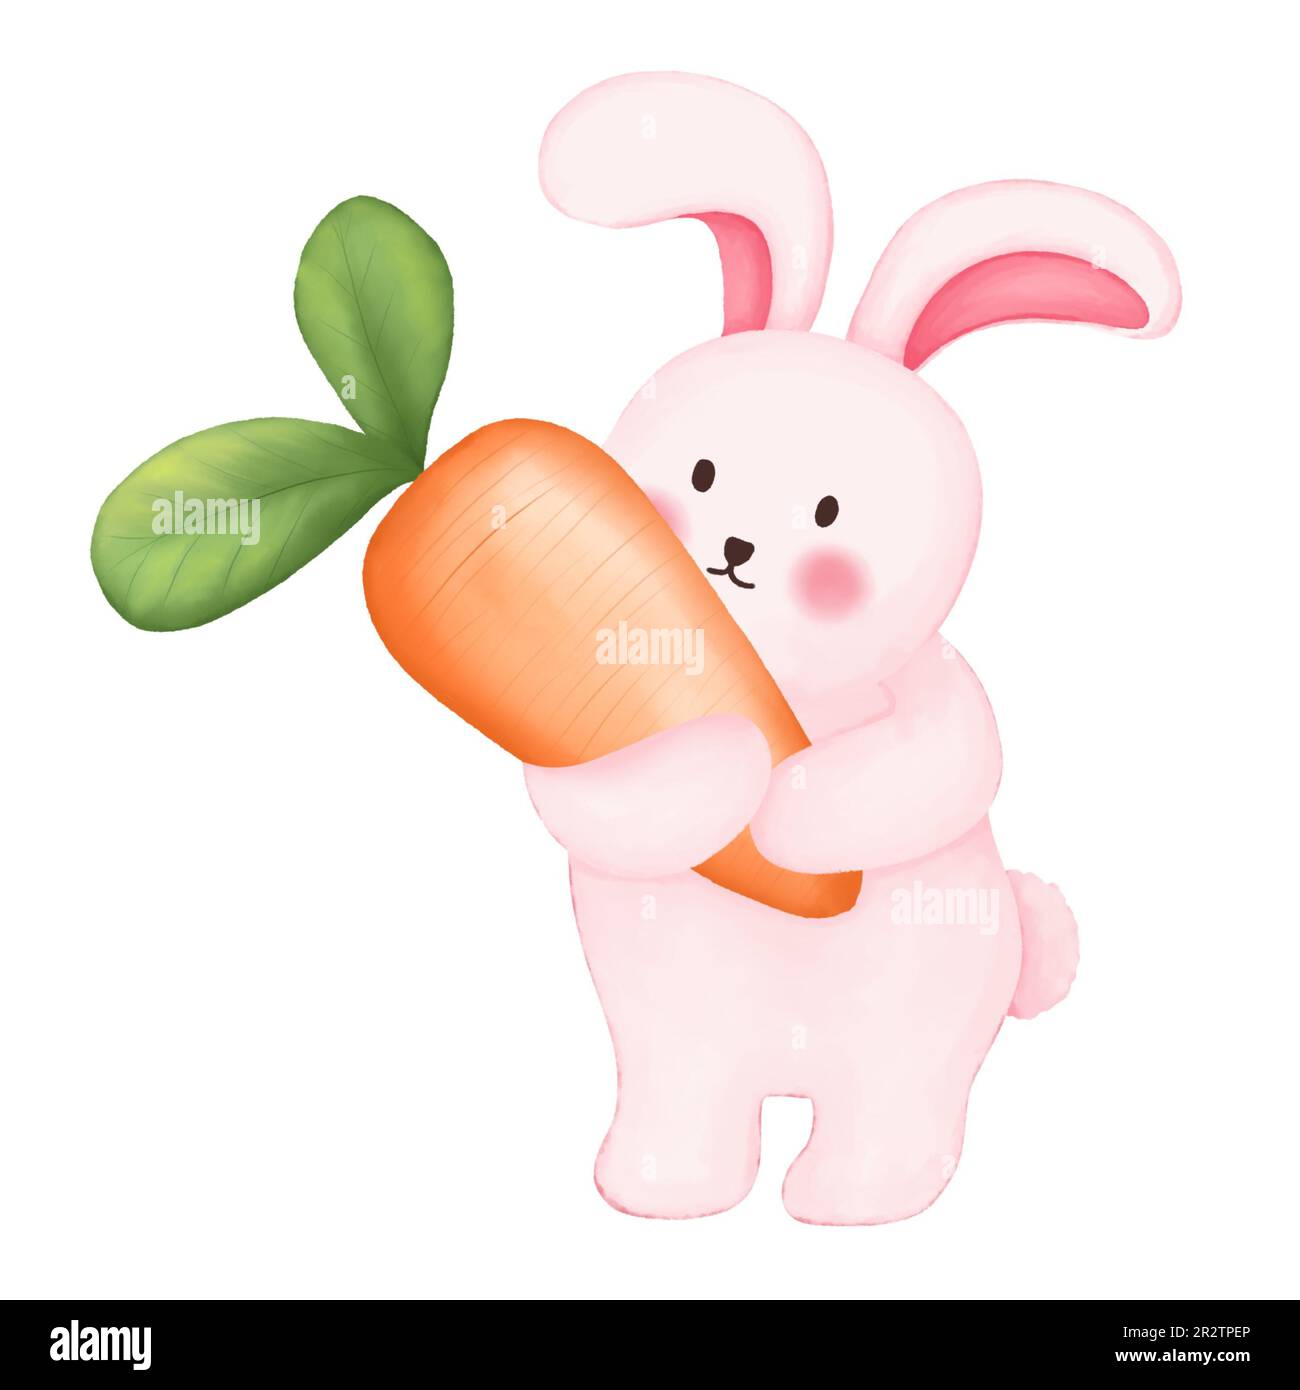 Easter bunny with carrot. Watercolor rabbit and carrot illustration. Easter Day element,greeting cards,wallpaper,stationary,scrapbook, etc. Stock Photo